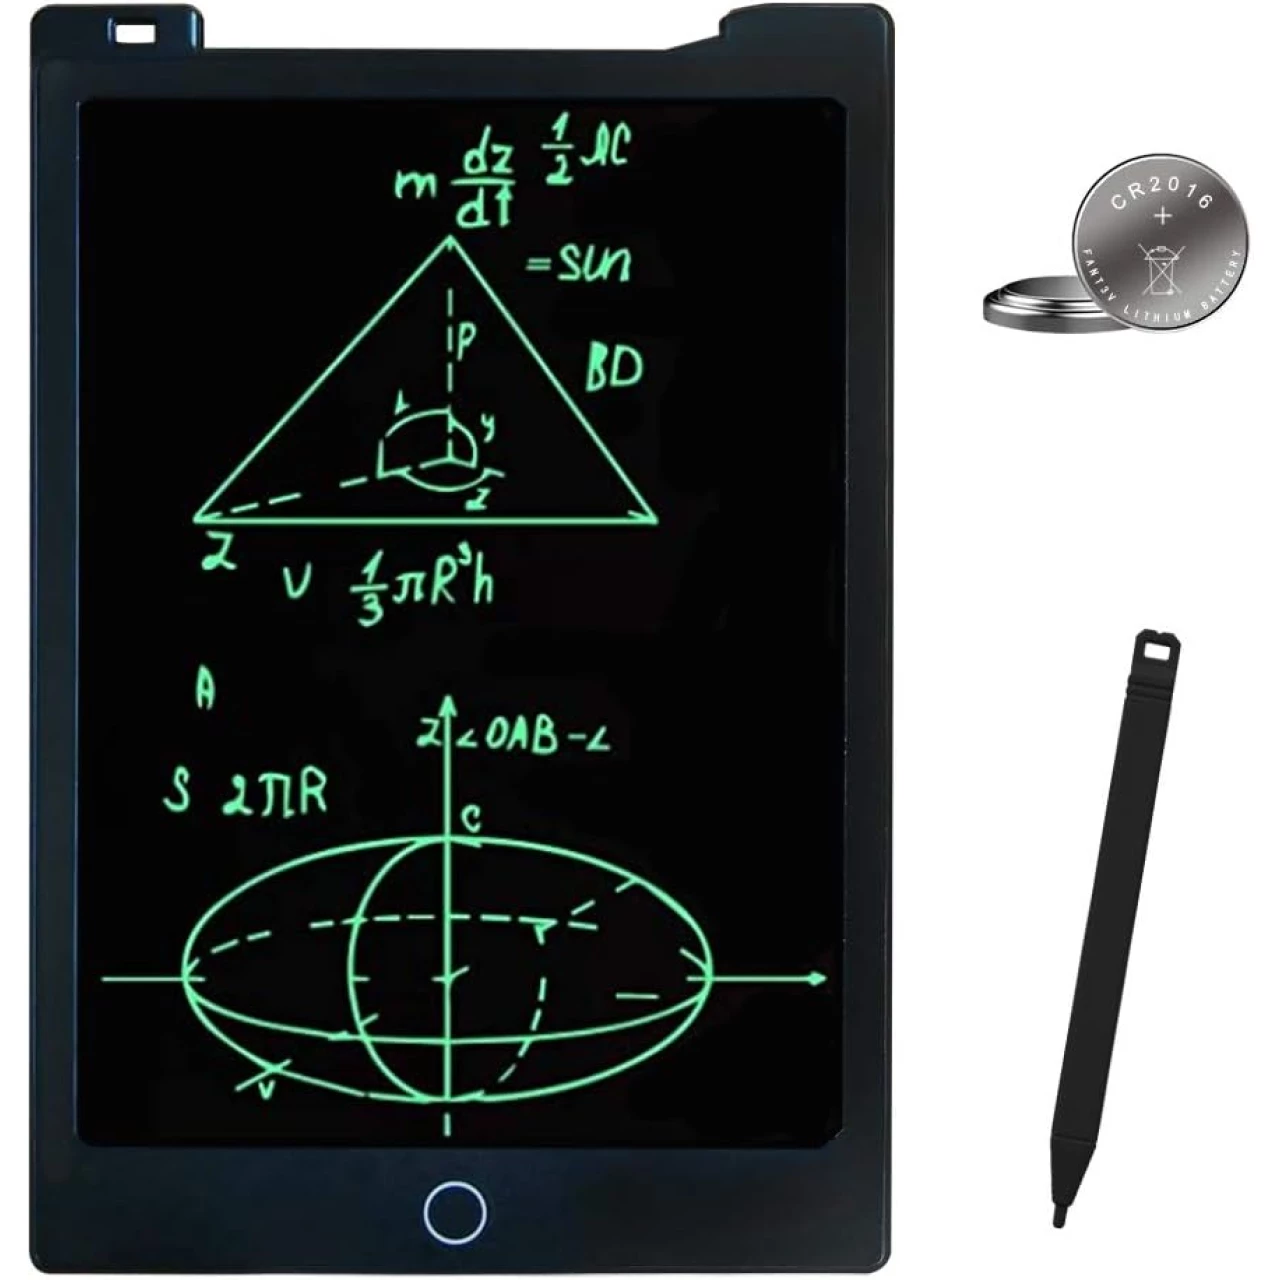 JONZOO LCD Writing Tablet 11 inch, Erasable Writing Drawing Board Doodle Pads with Magnets, Electronic Writing Board for Kids Adults at Home School Office (Black)